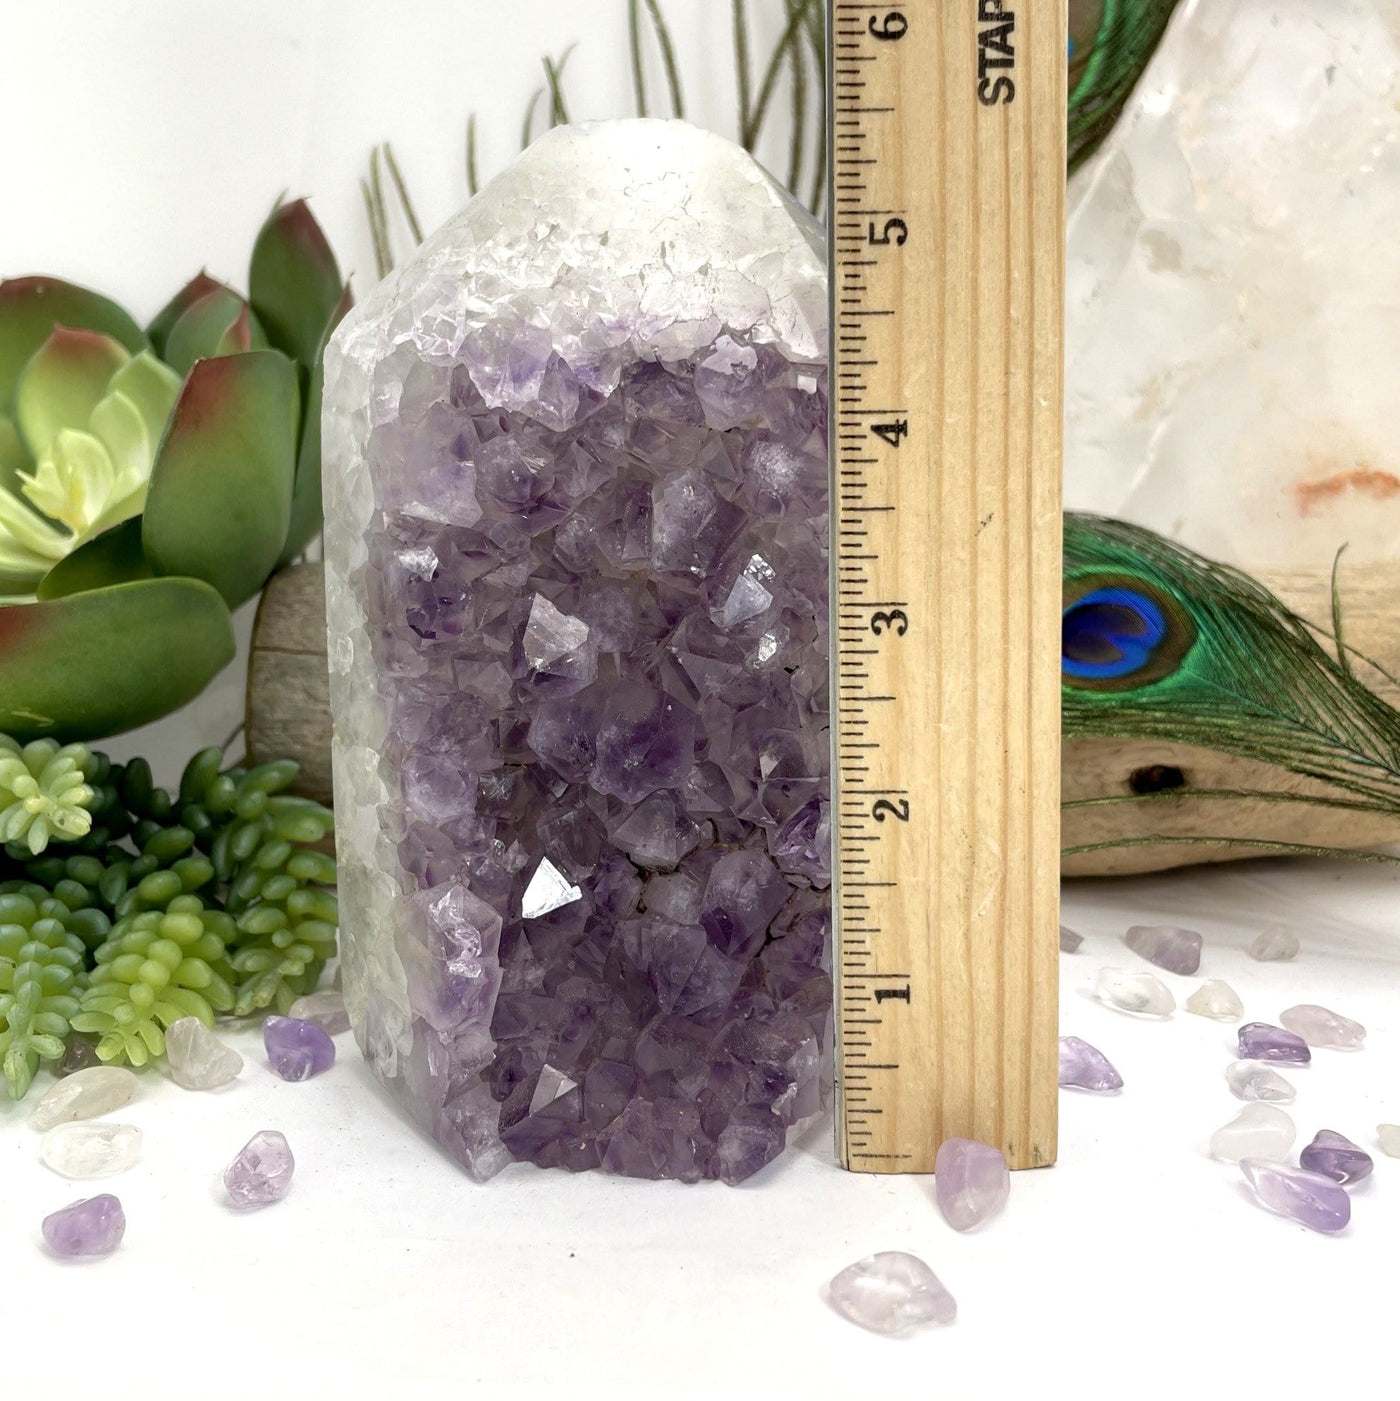 Picture of amethyst agate druzy point next to ruler for size reference.